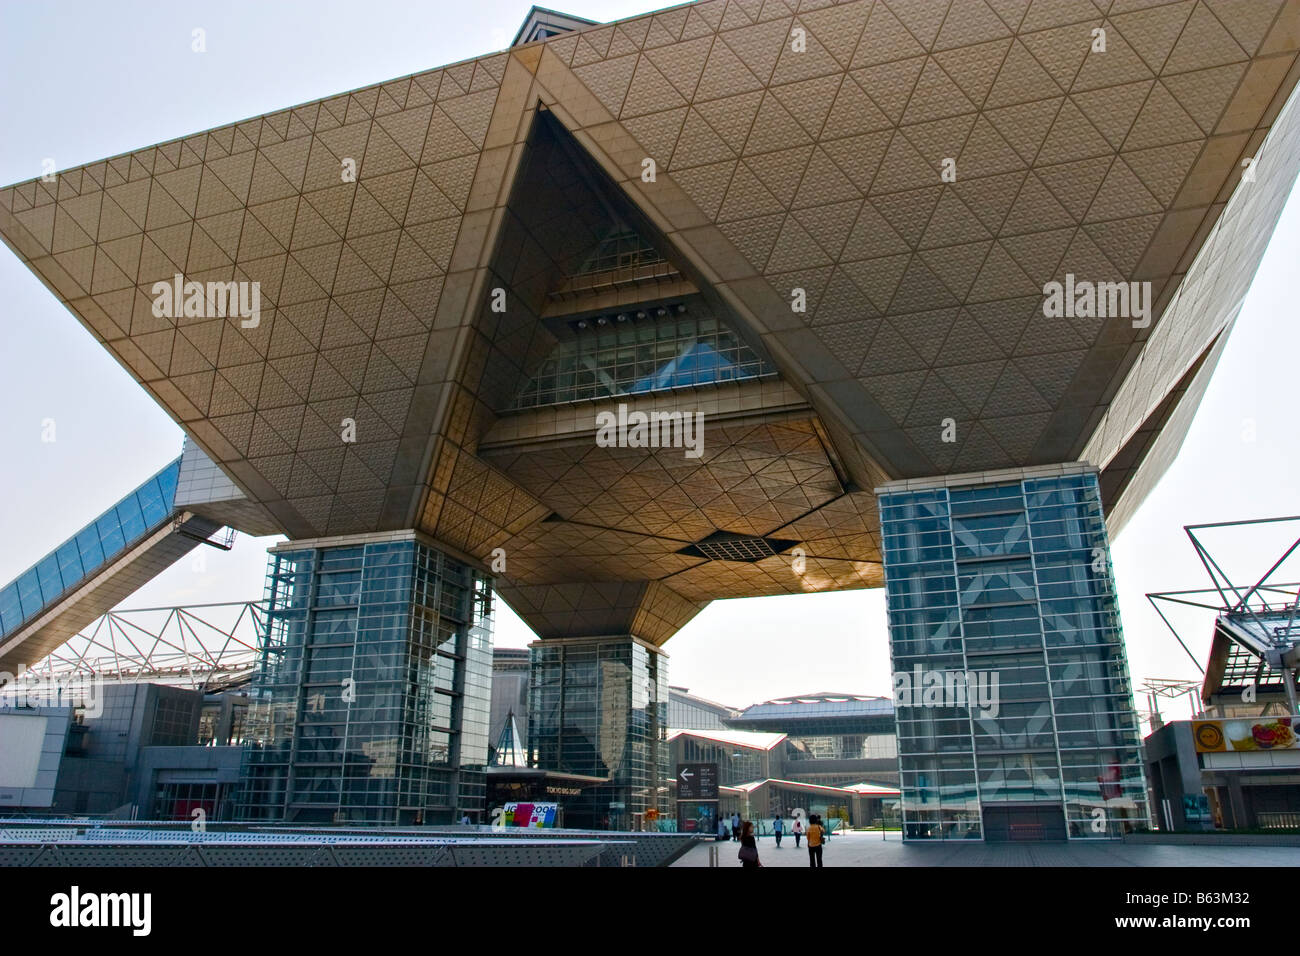 Tokyo Big Sight conference and exhibition centre in Odaiba, Tokyo, Japan Stock Photo